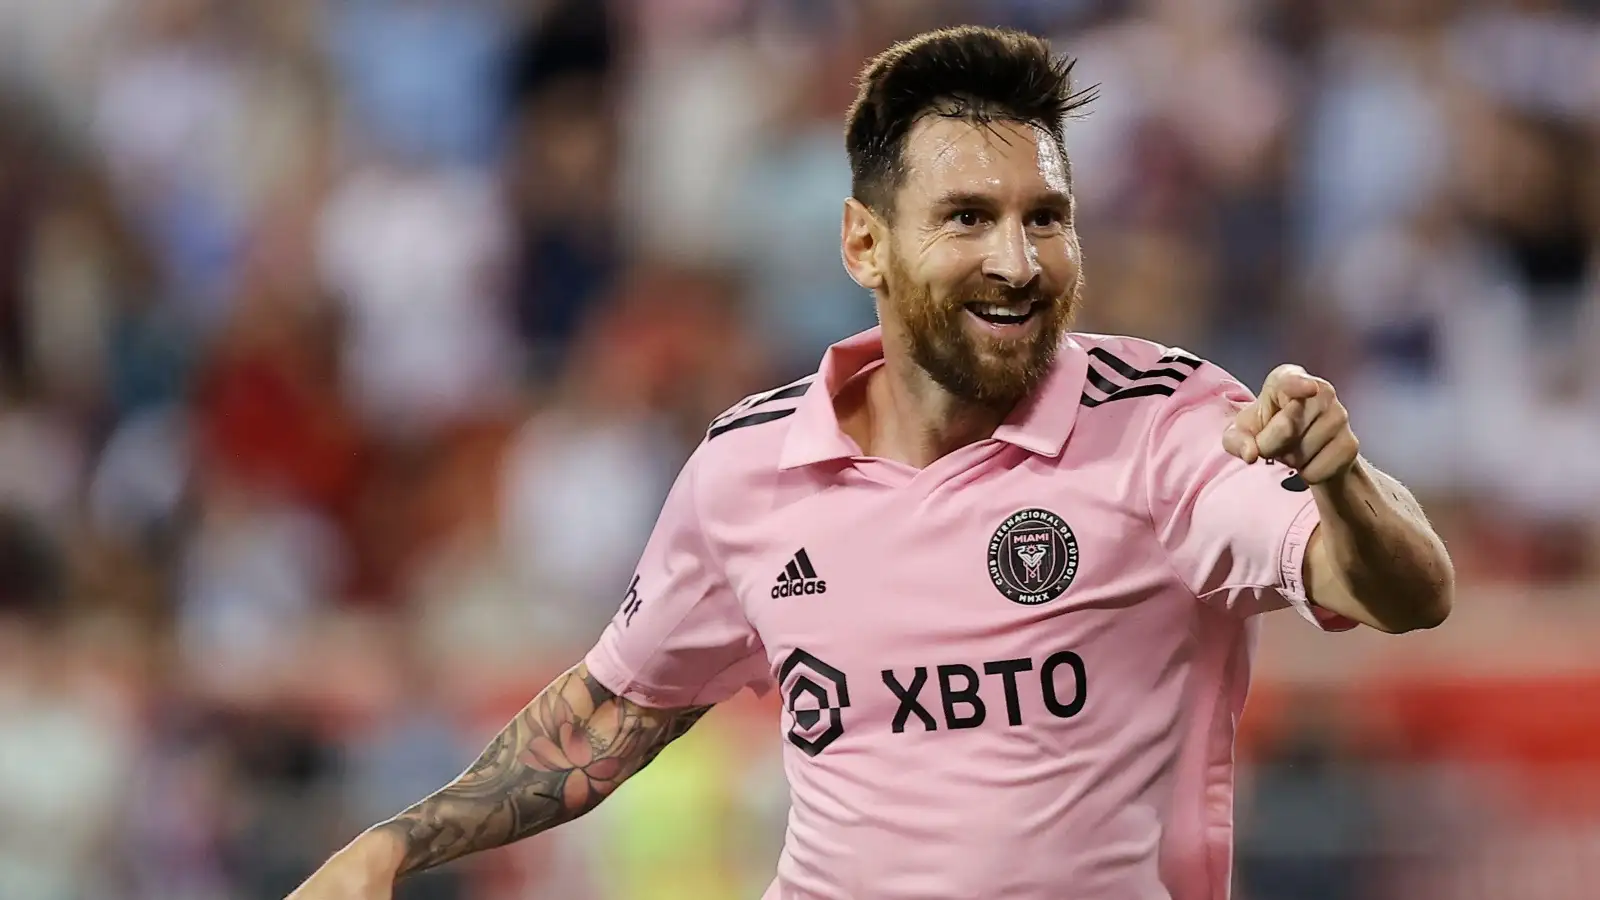 Surrounded by five defenders, Lionel Messi chose his MLS debut to reinvent the rules of physics